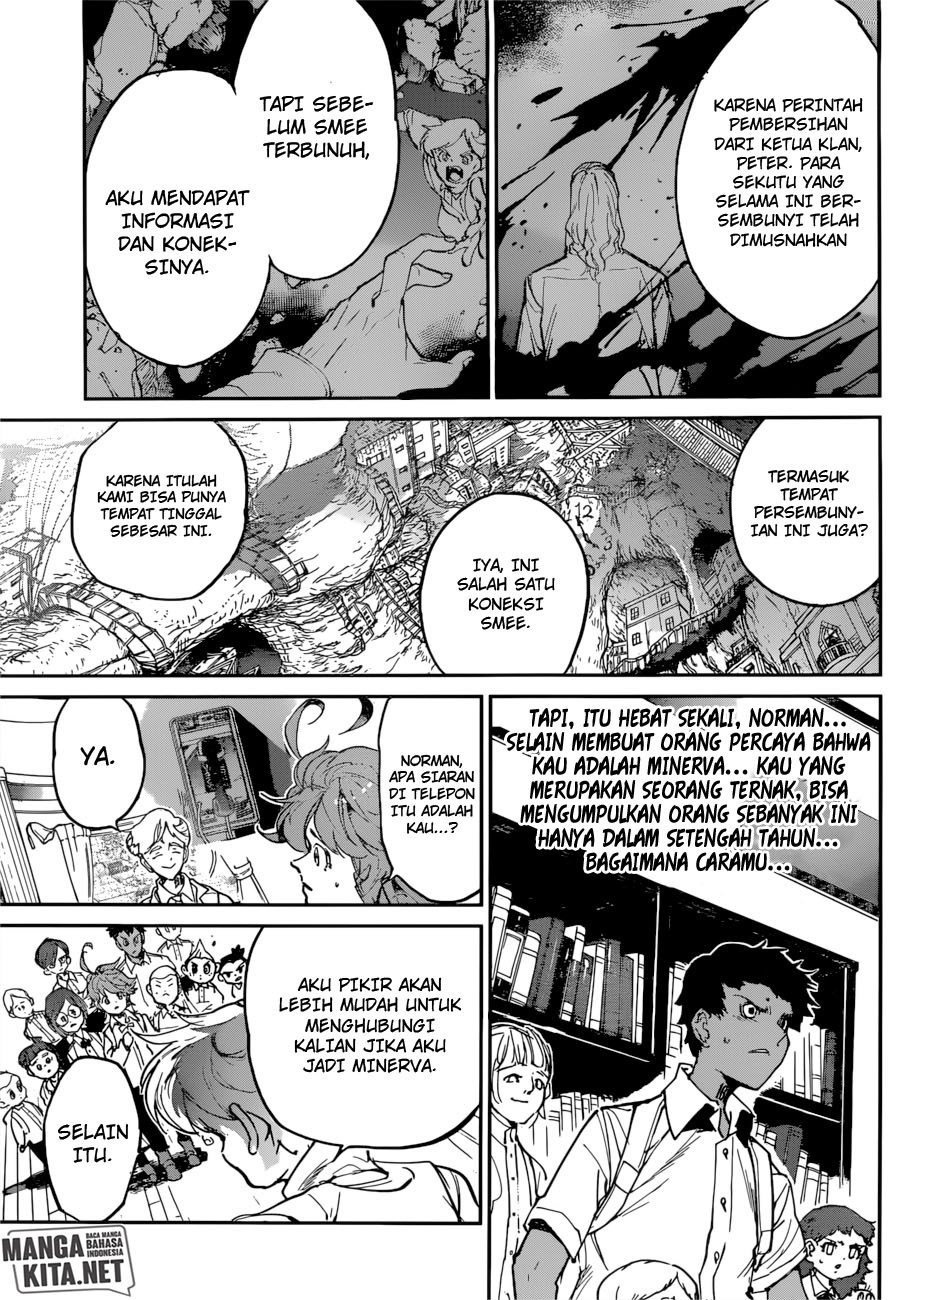 The Promised Neverland Chapter 119